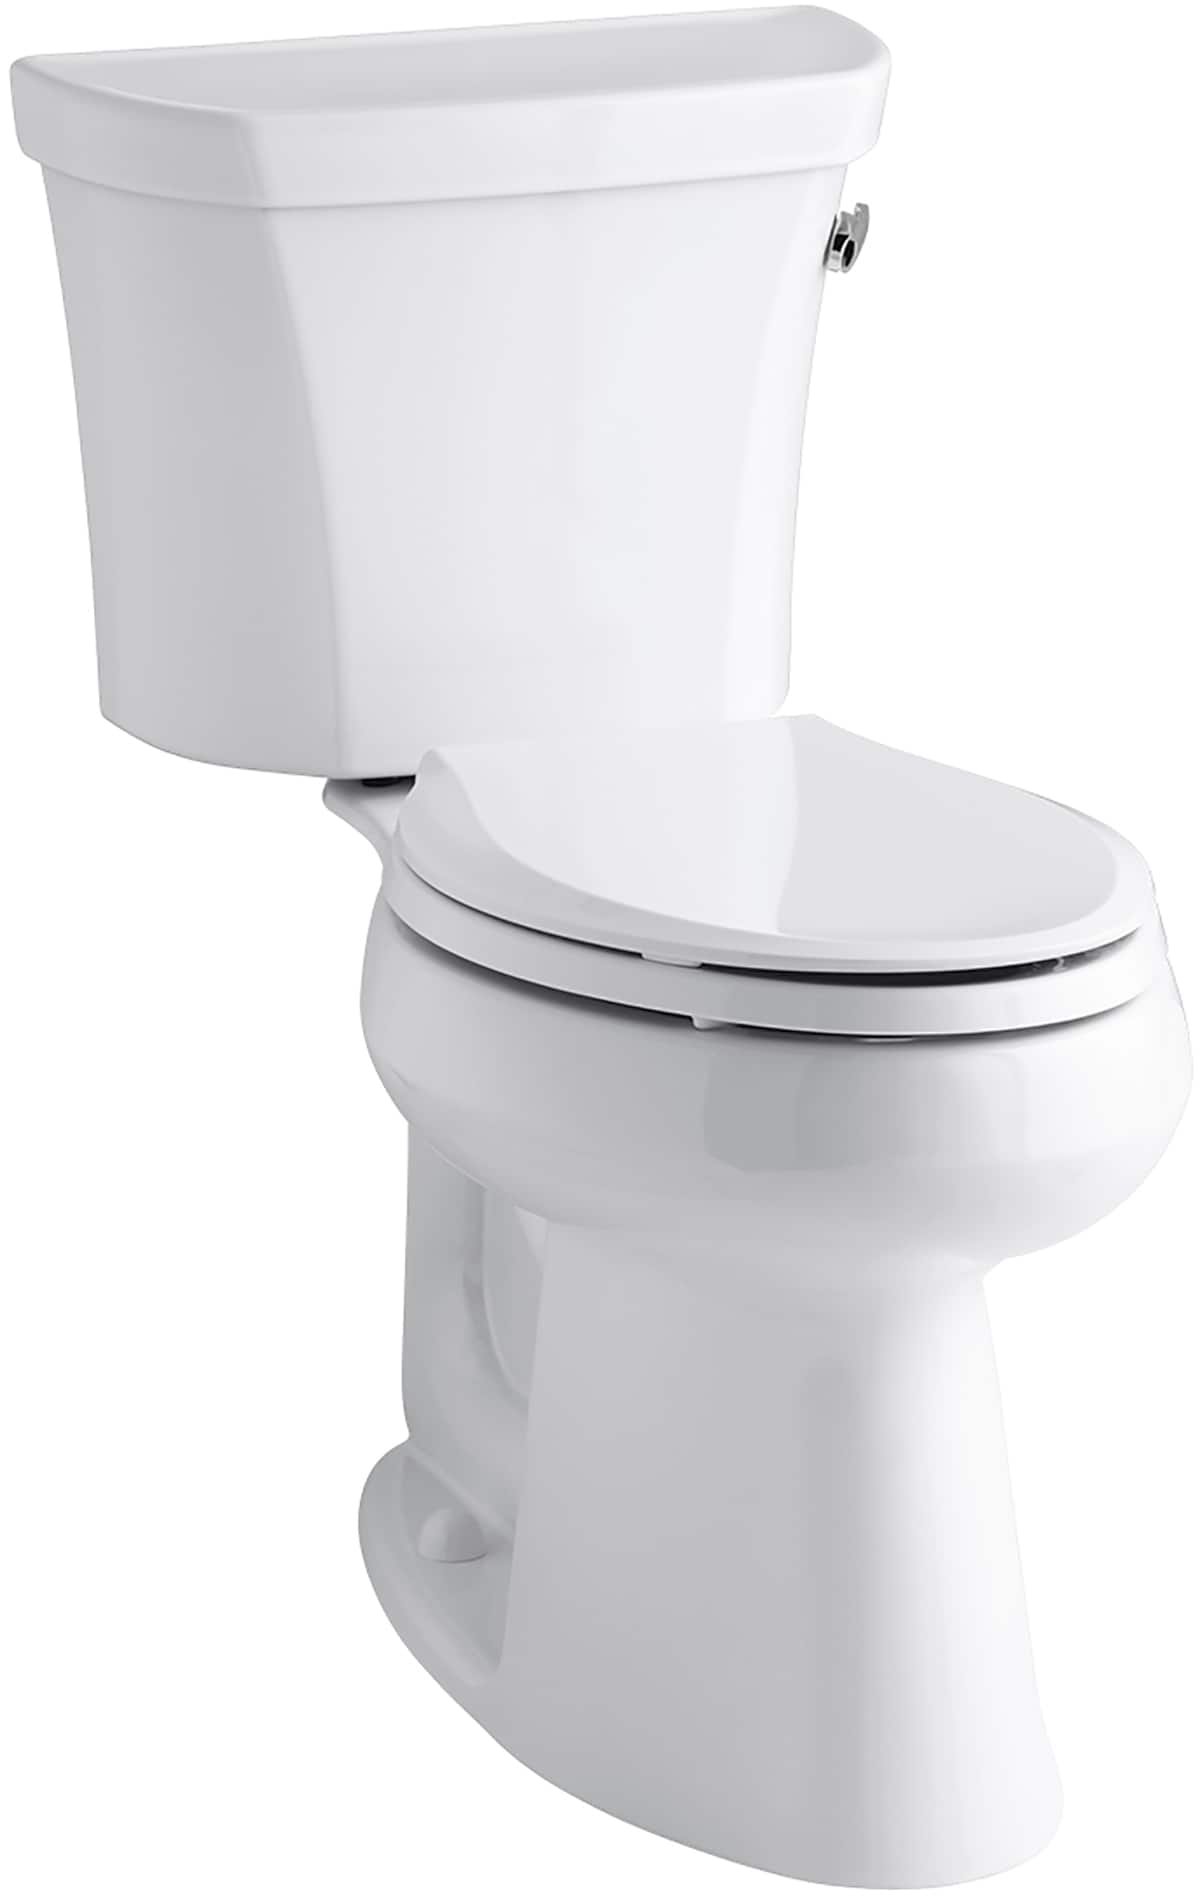 10-in Rough KOHLER Toilets & Toilet Seats at Lowes.com